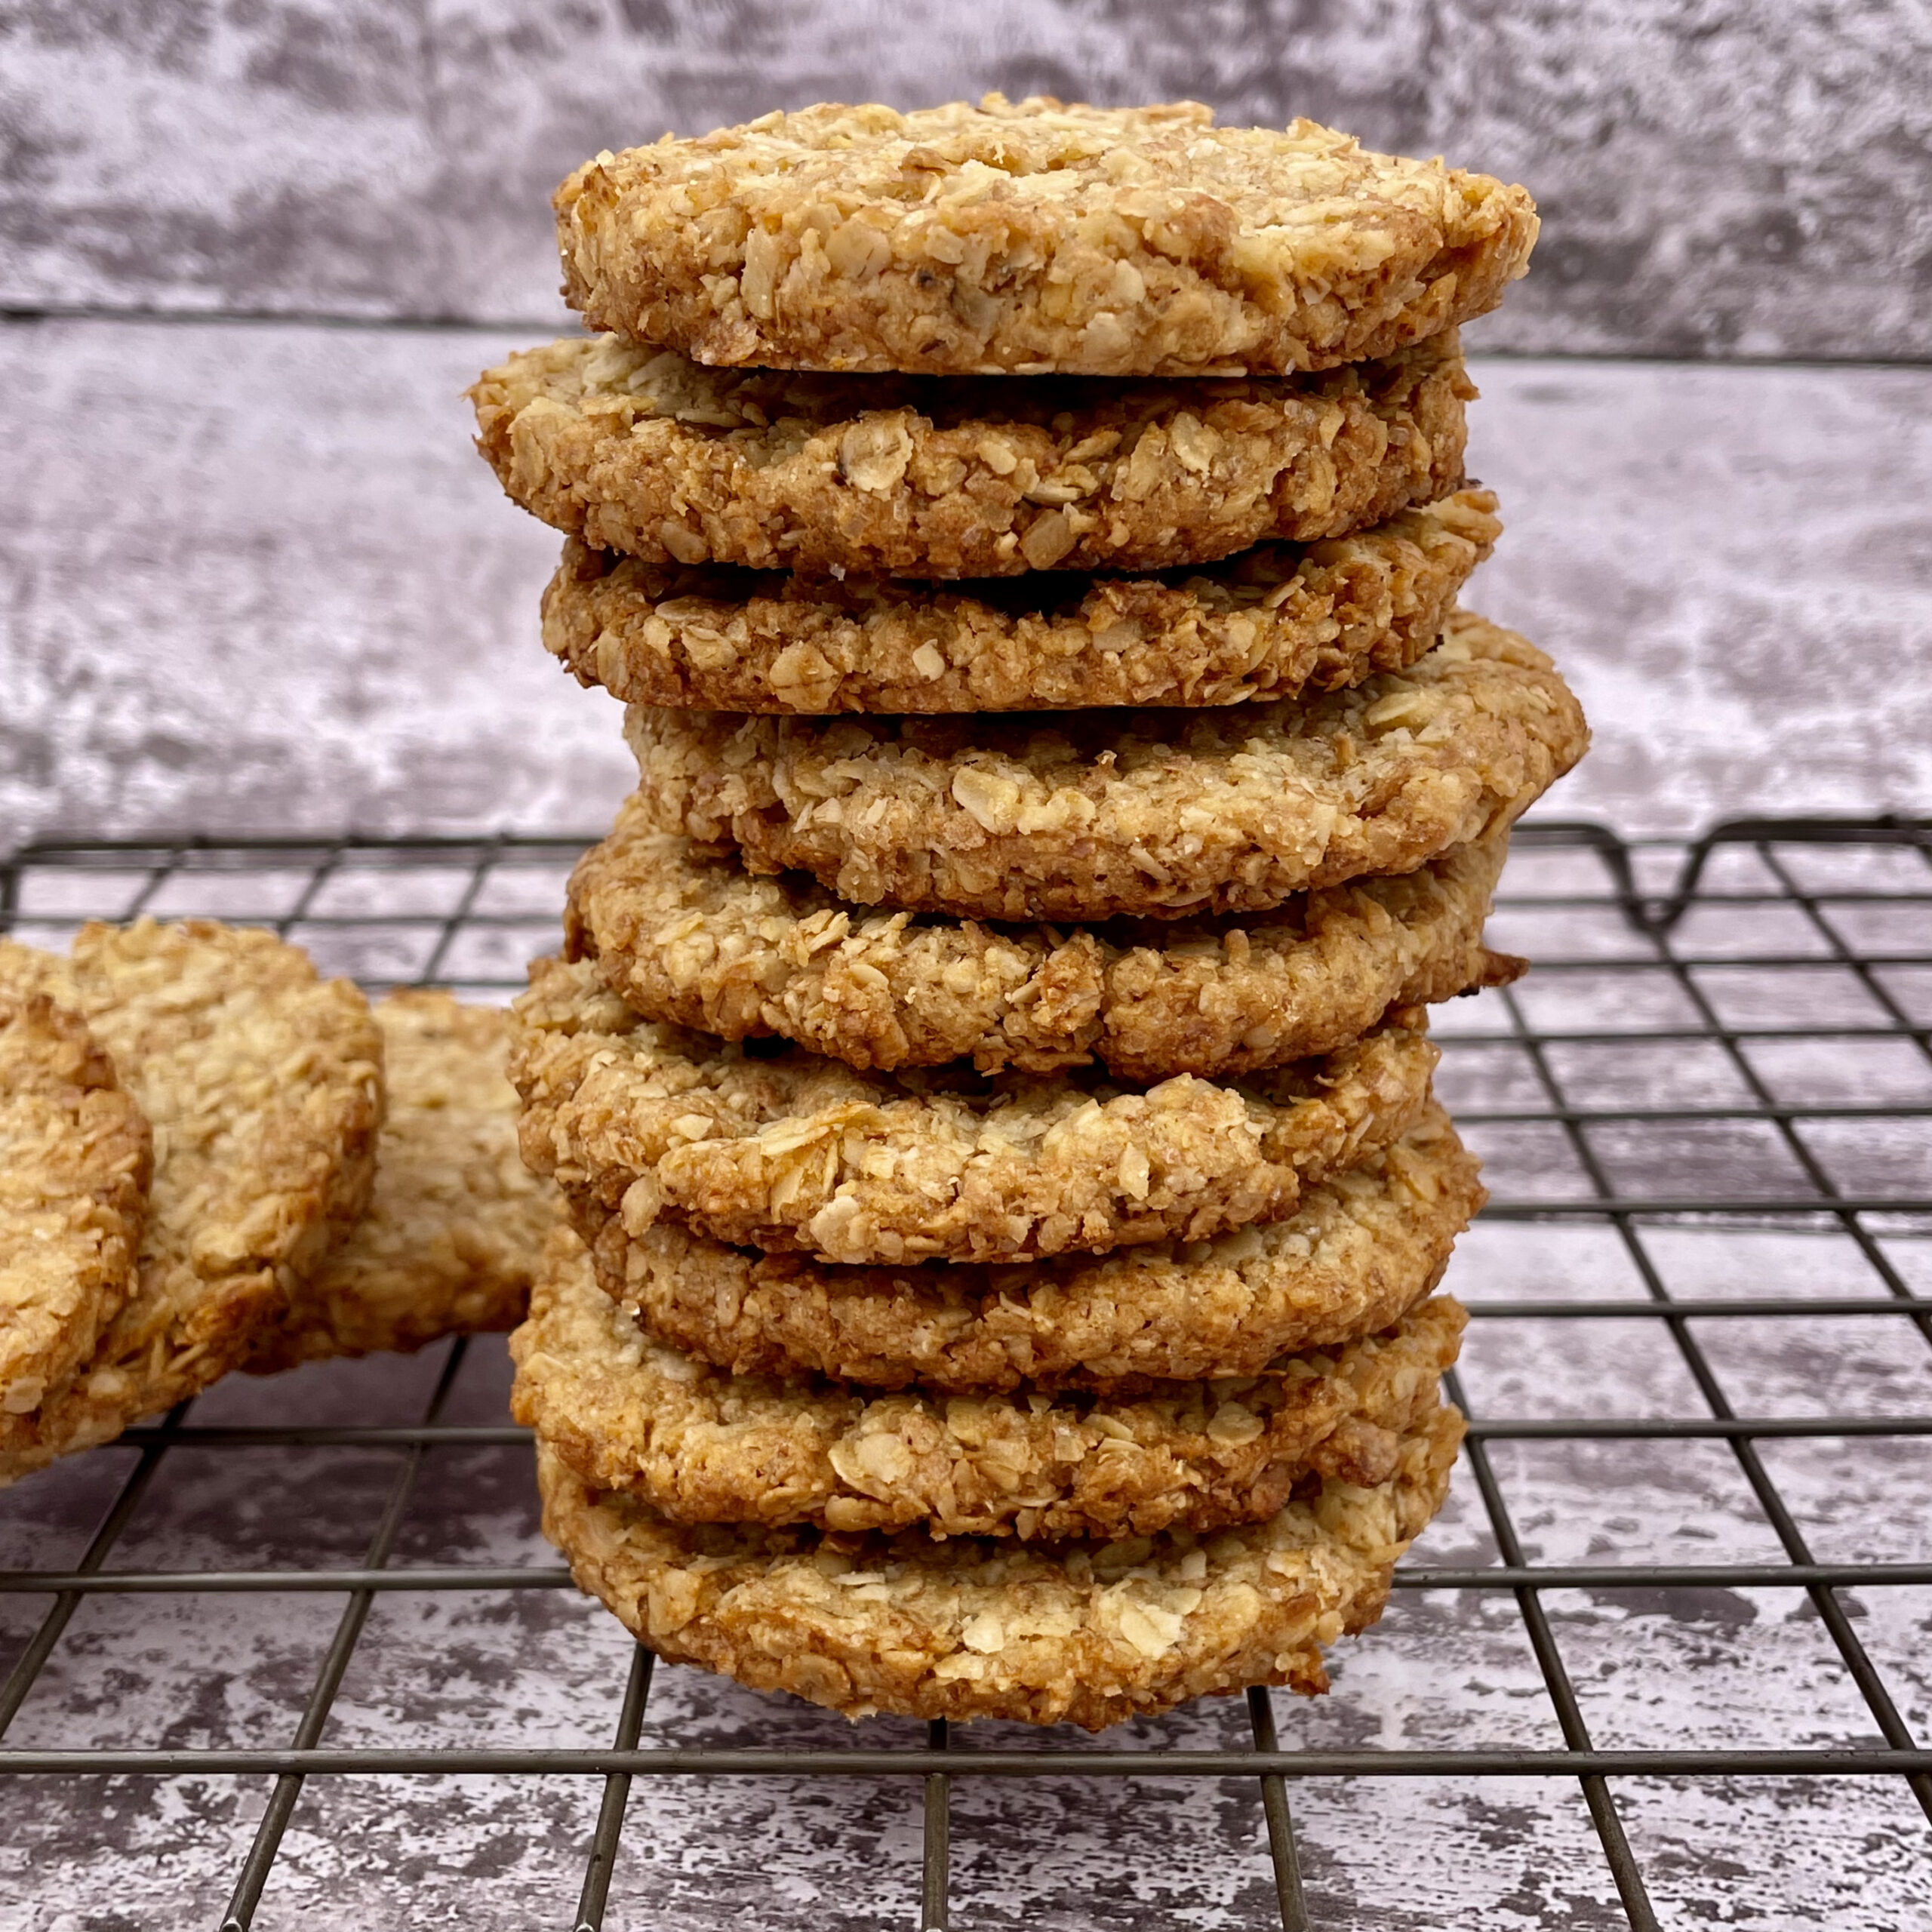 A stack of homemade oat biscuits on a wire rack